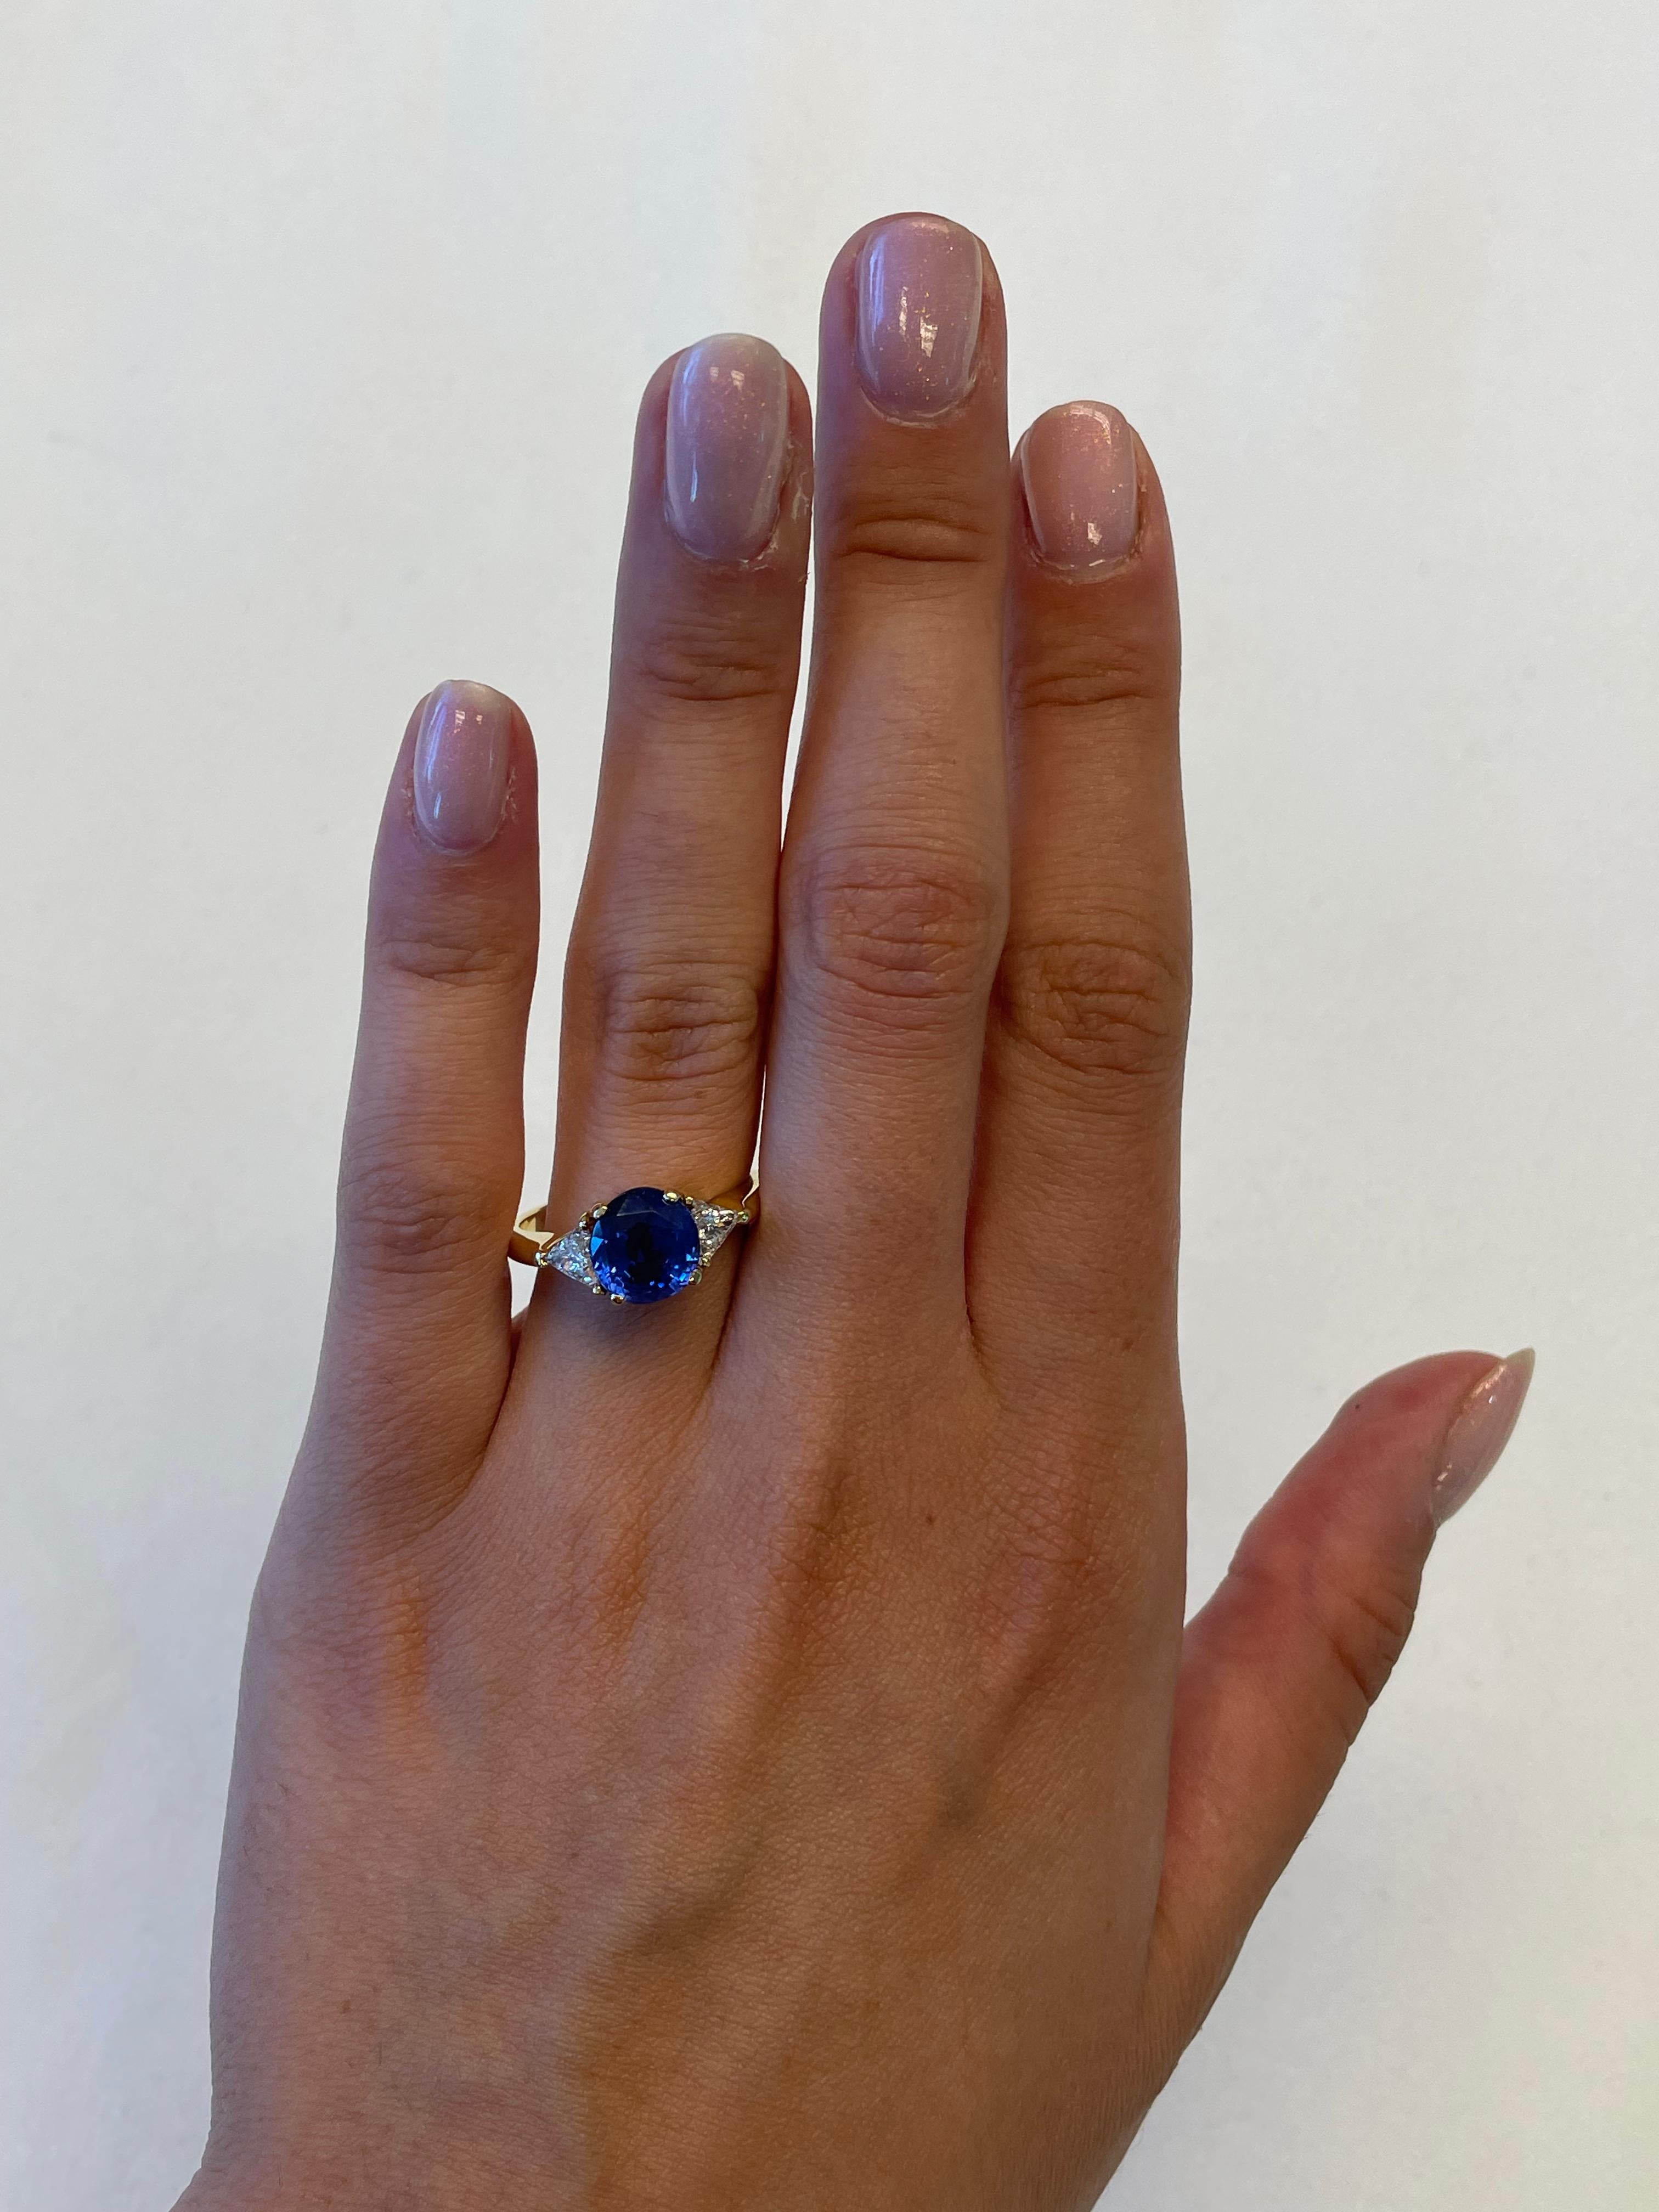 Stunning no heat Burmese sapphire and diamond three stone ring. High jewelry by Alexander Beverly Hills.
3.64 carats total gemstone weight. 
Oval Burmese sapphire, 3.14 carats, no heat, AGL certified. Complimented with 2 trilliant cut diamonds, 0.50